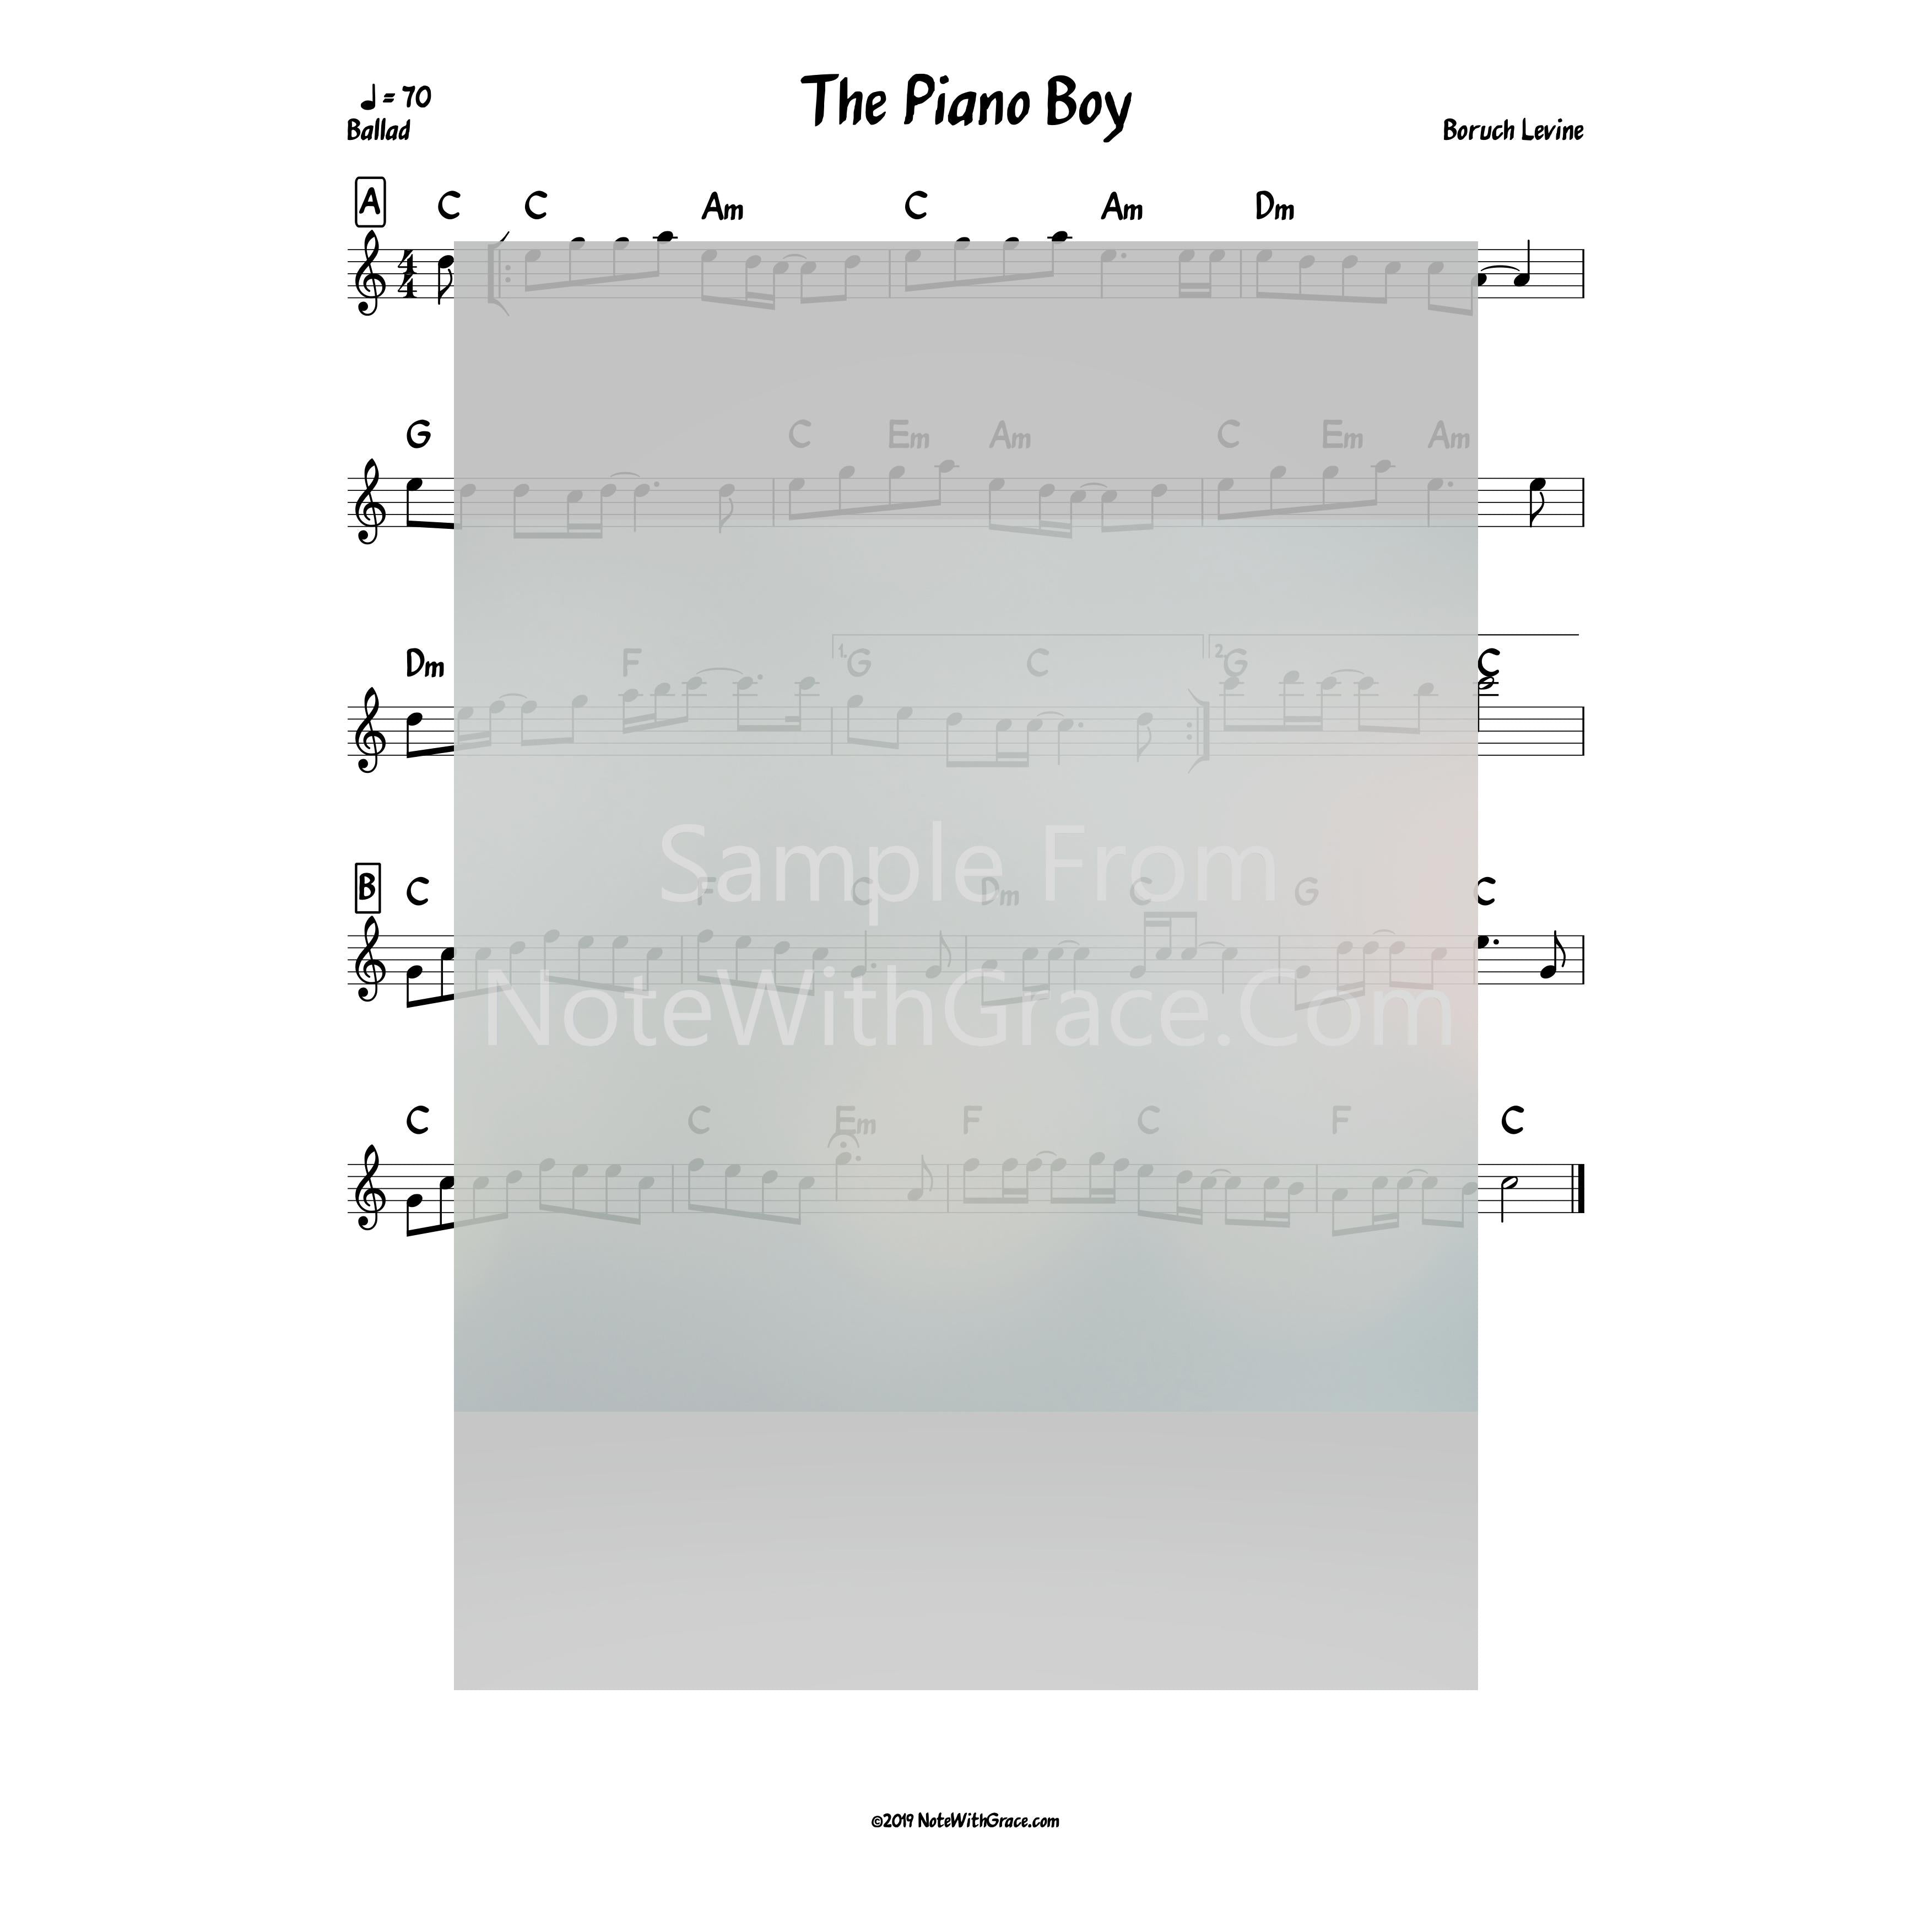 The Piano Boy Lead Sheet (Boruch Levine) Album: Touched By a Niggun Released 2009-Sheet music-NoteWithGrace.com